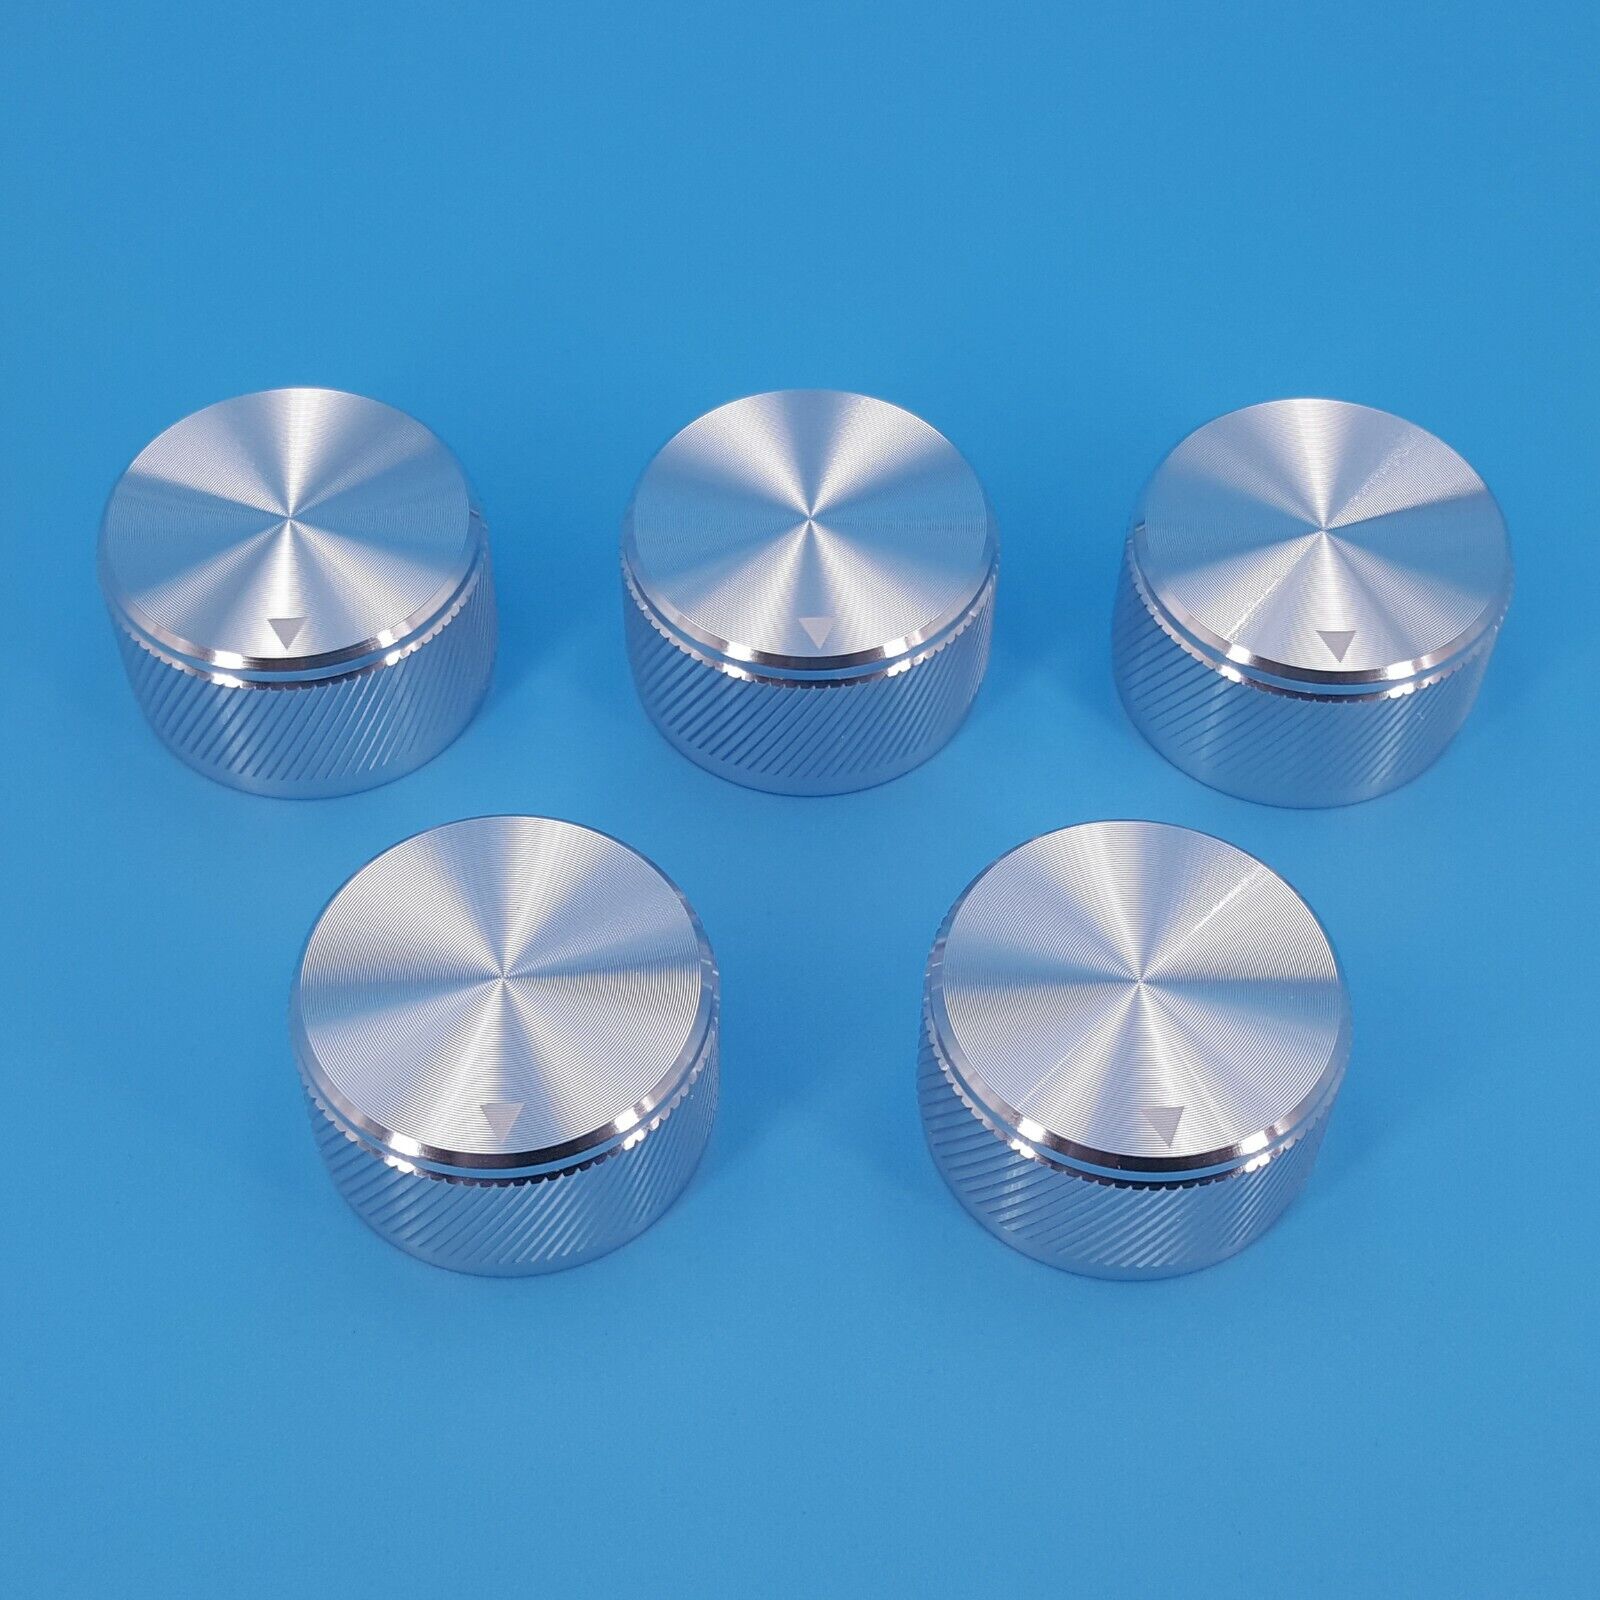 5Pcs Silver 30 x 17mm Solid Aluminum 6mm Dia Rotary Control Potentiometer Knob Unbranded/Generic Does Not Apply